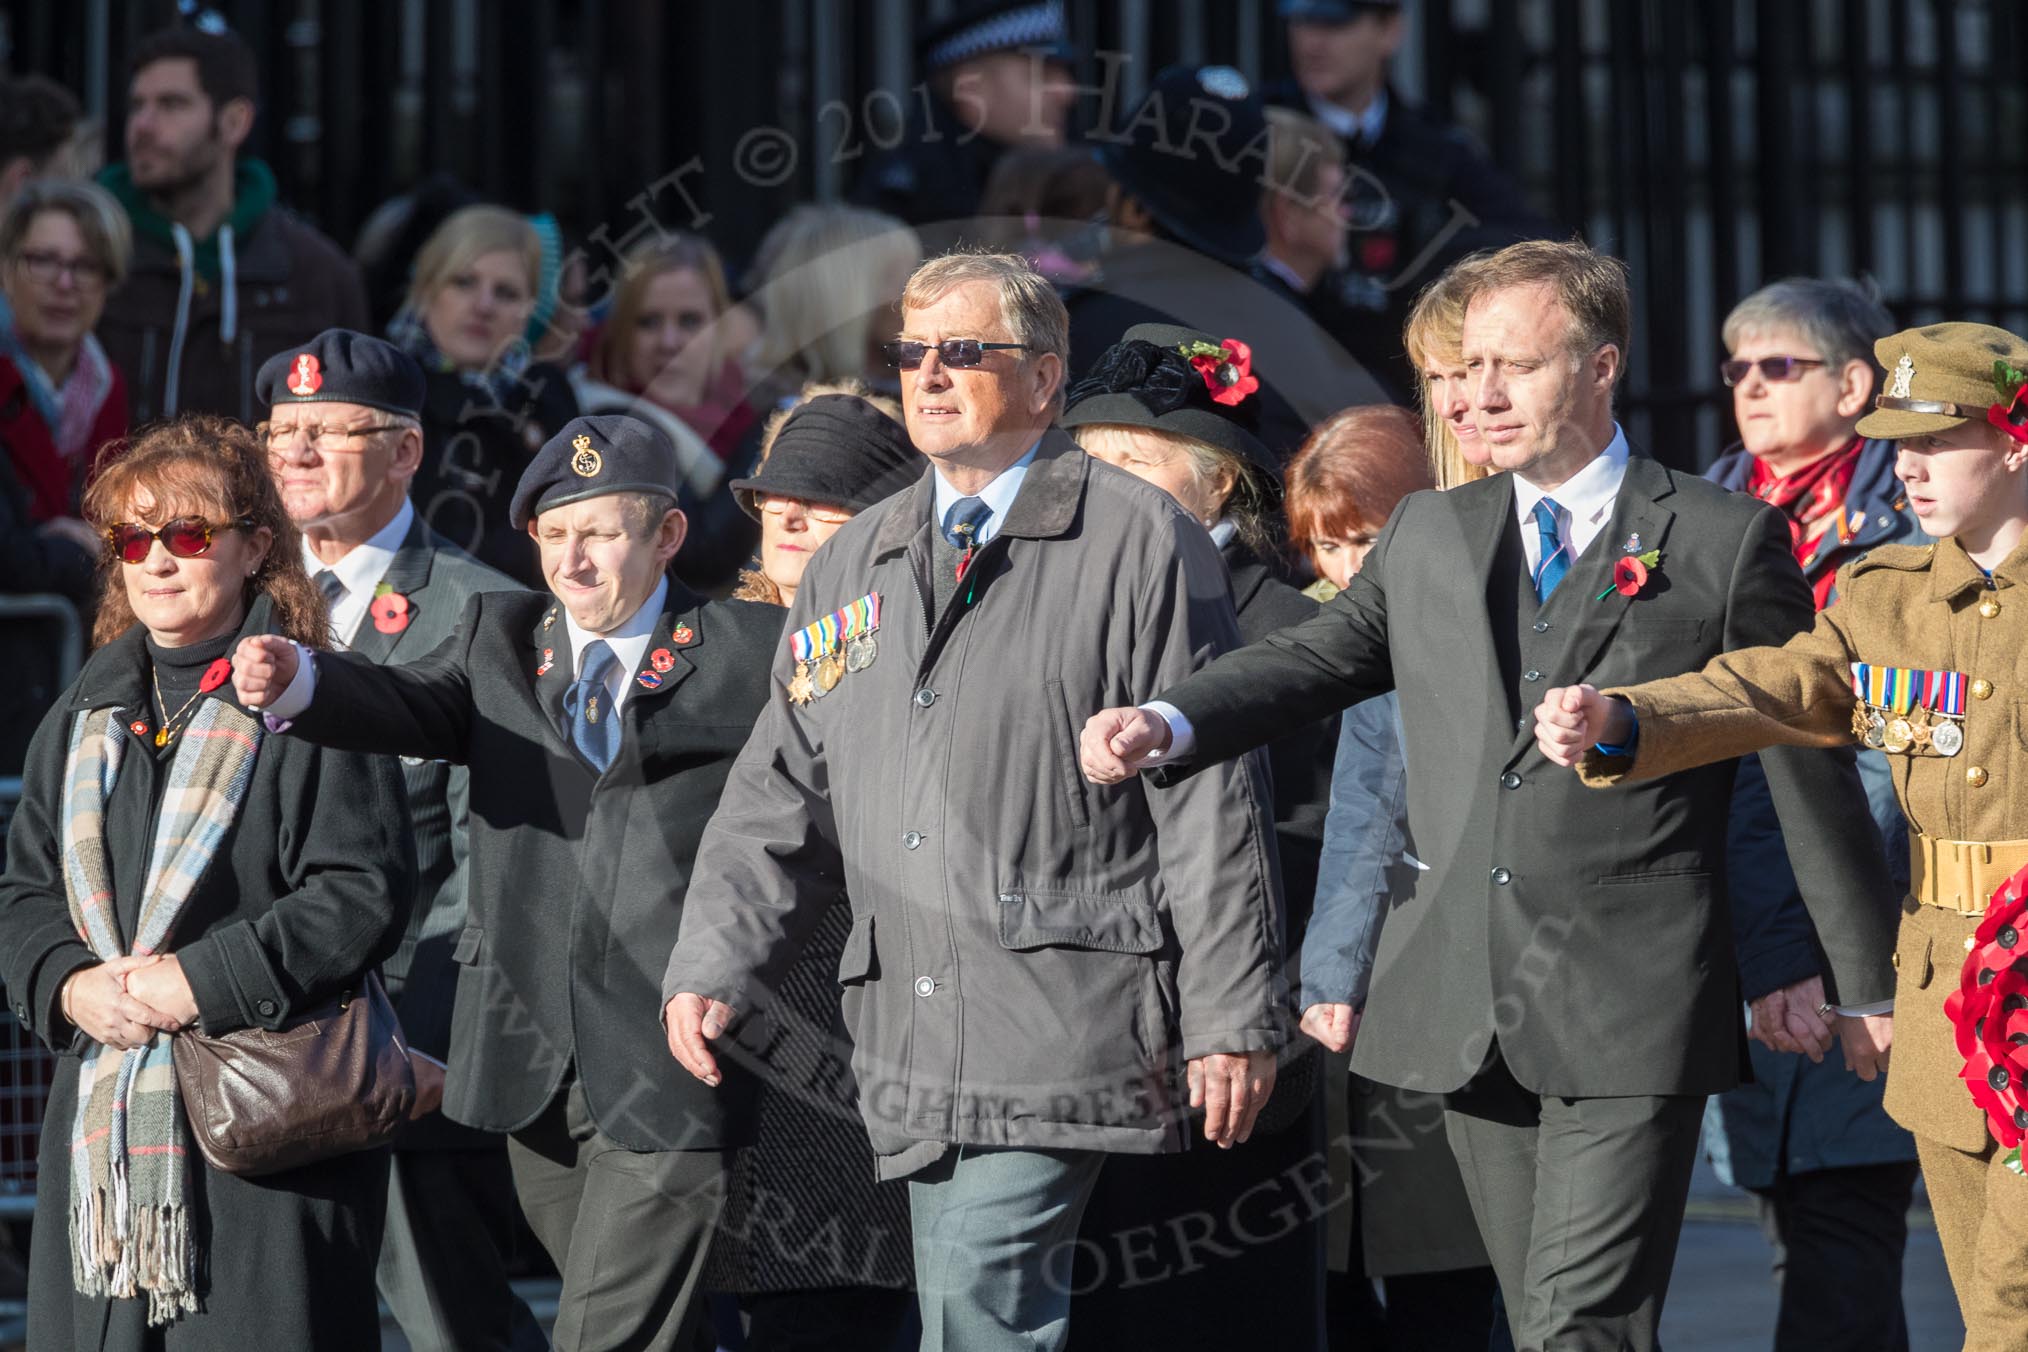 March Past, Remembrance Sunday at the Cenotaph 2016: M22 The Royal British Legion - Civilians.
Cenotaph, Whitehall, London SW1,
London,
Greater London,
United Kingdom,
on 13 November 2016 at 13:16, image #2666